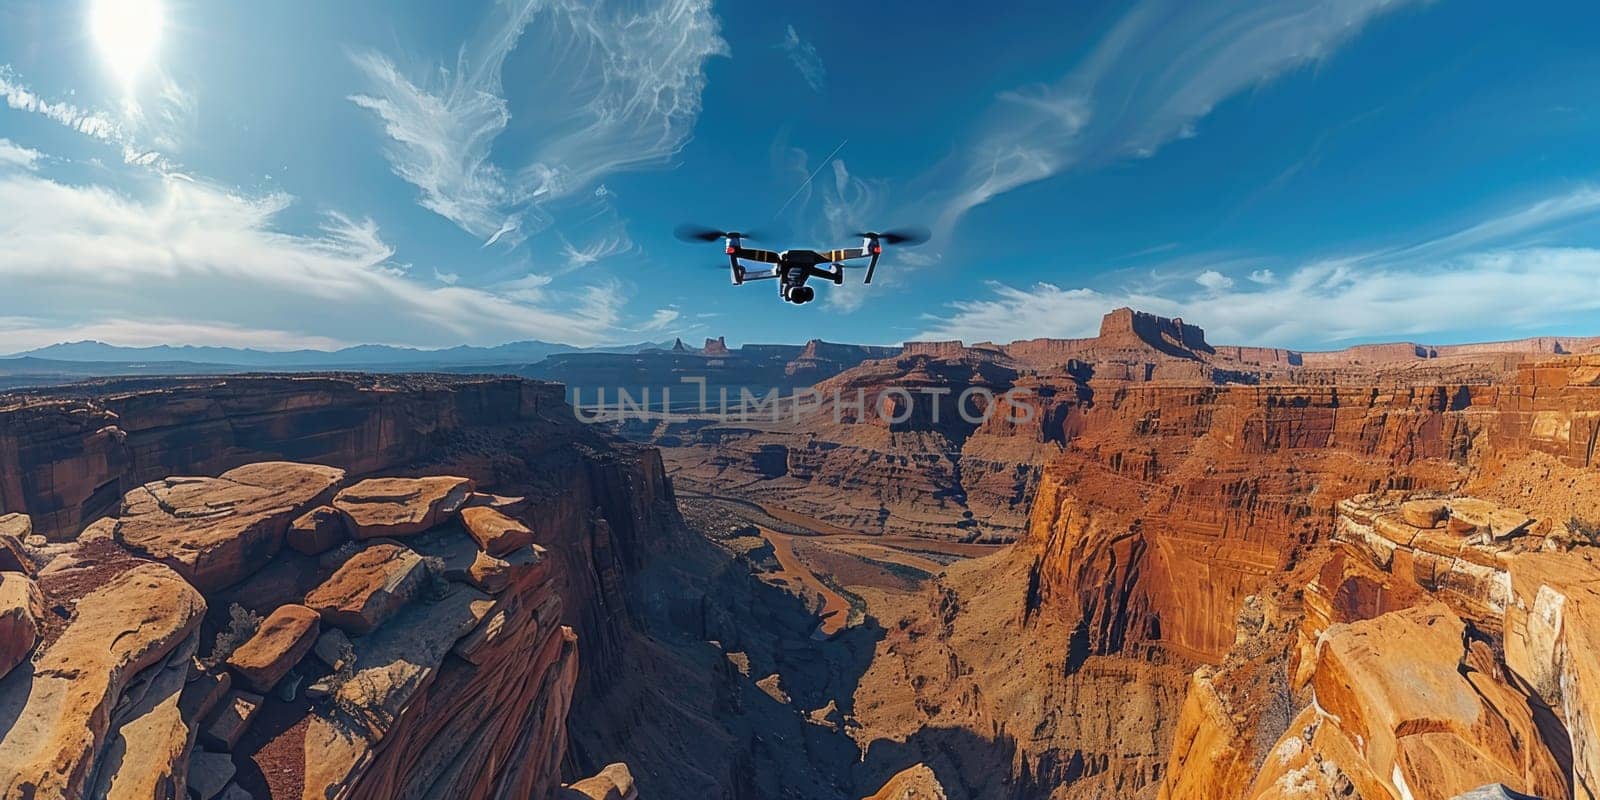 A small plane is seen flying over a canyon in the desert, showcasing the vast landscape below.